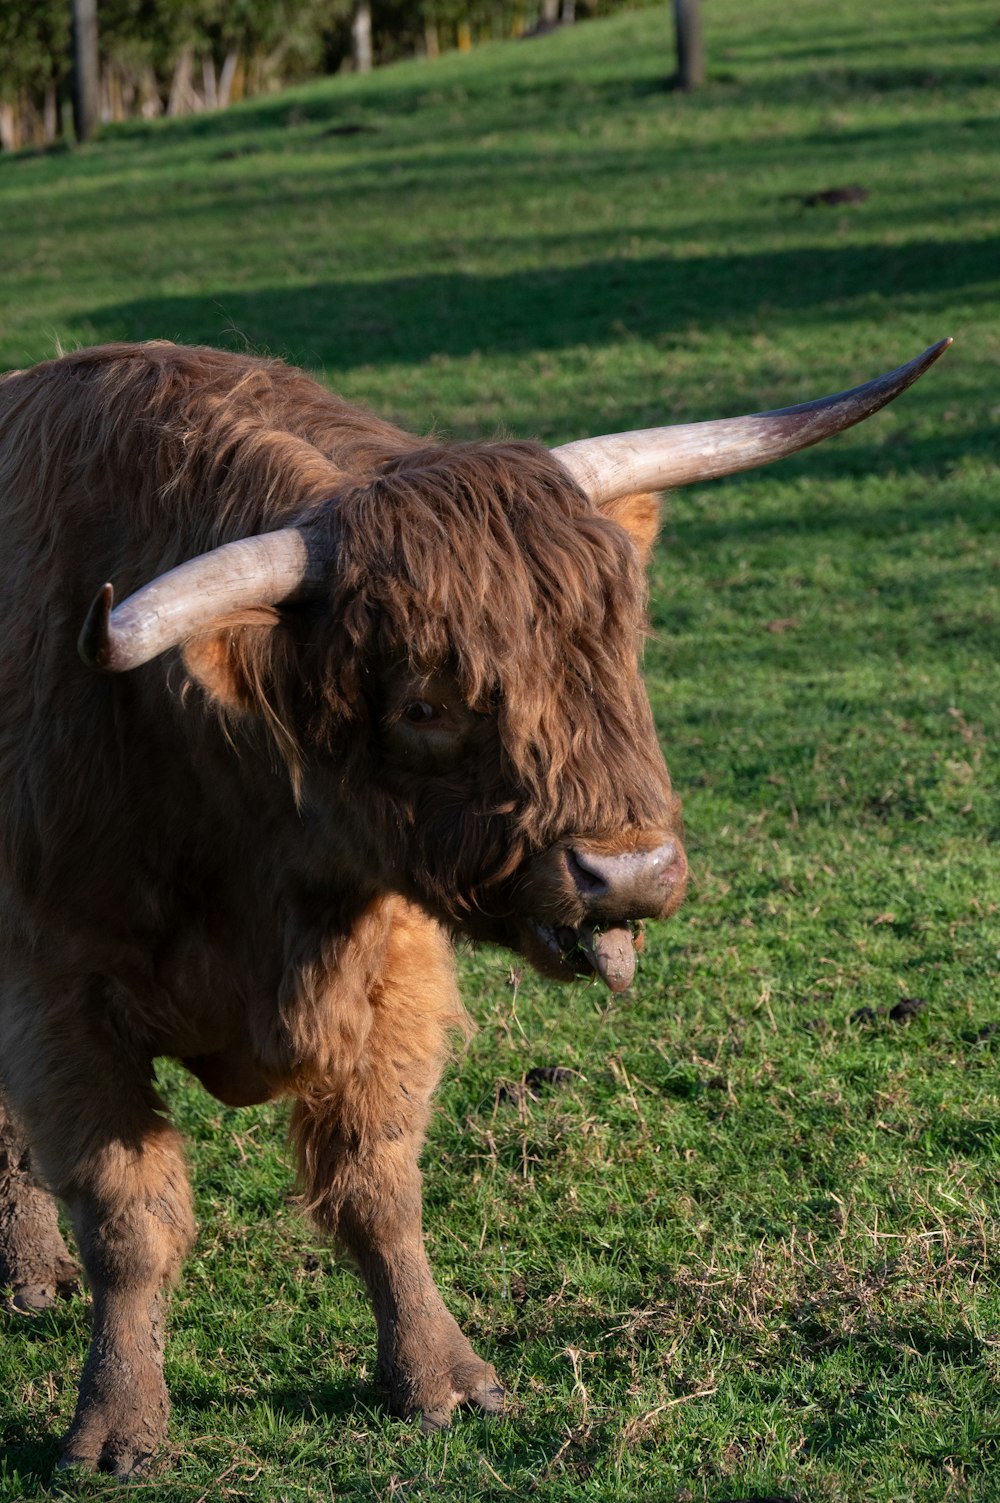 a bull with long horns standing in a field